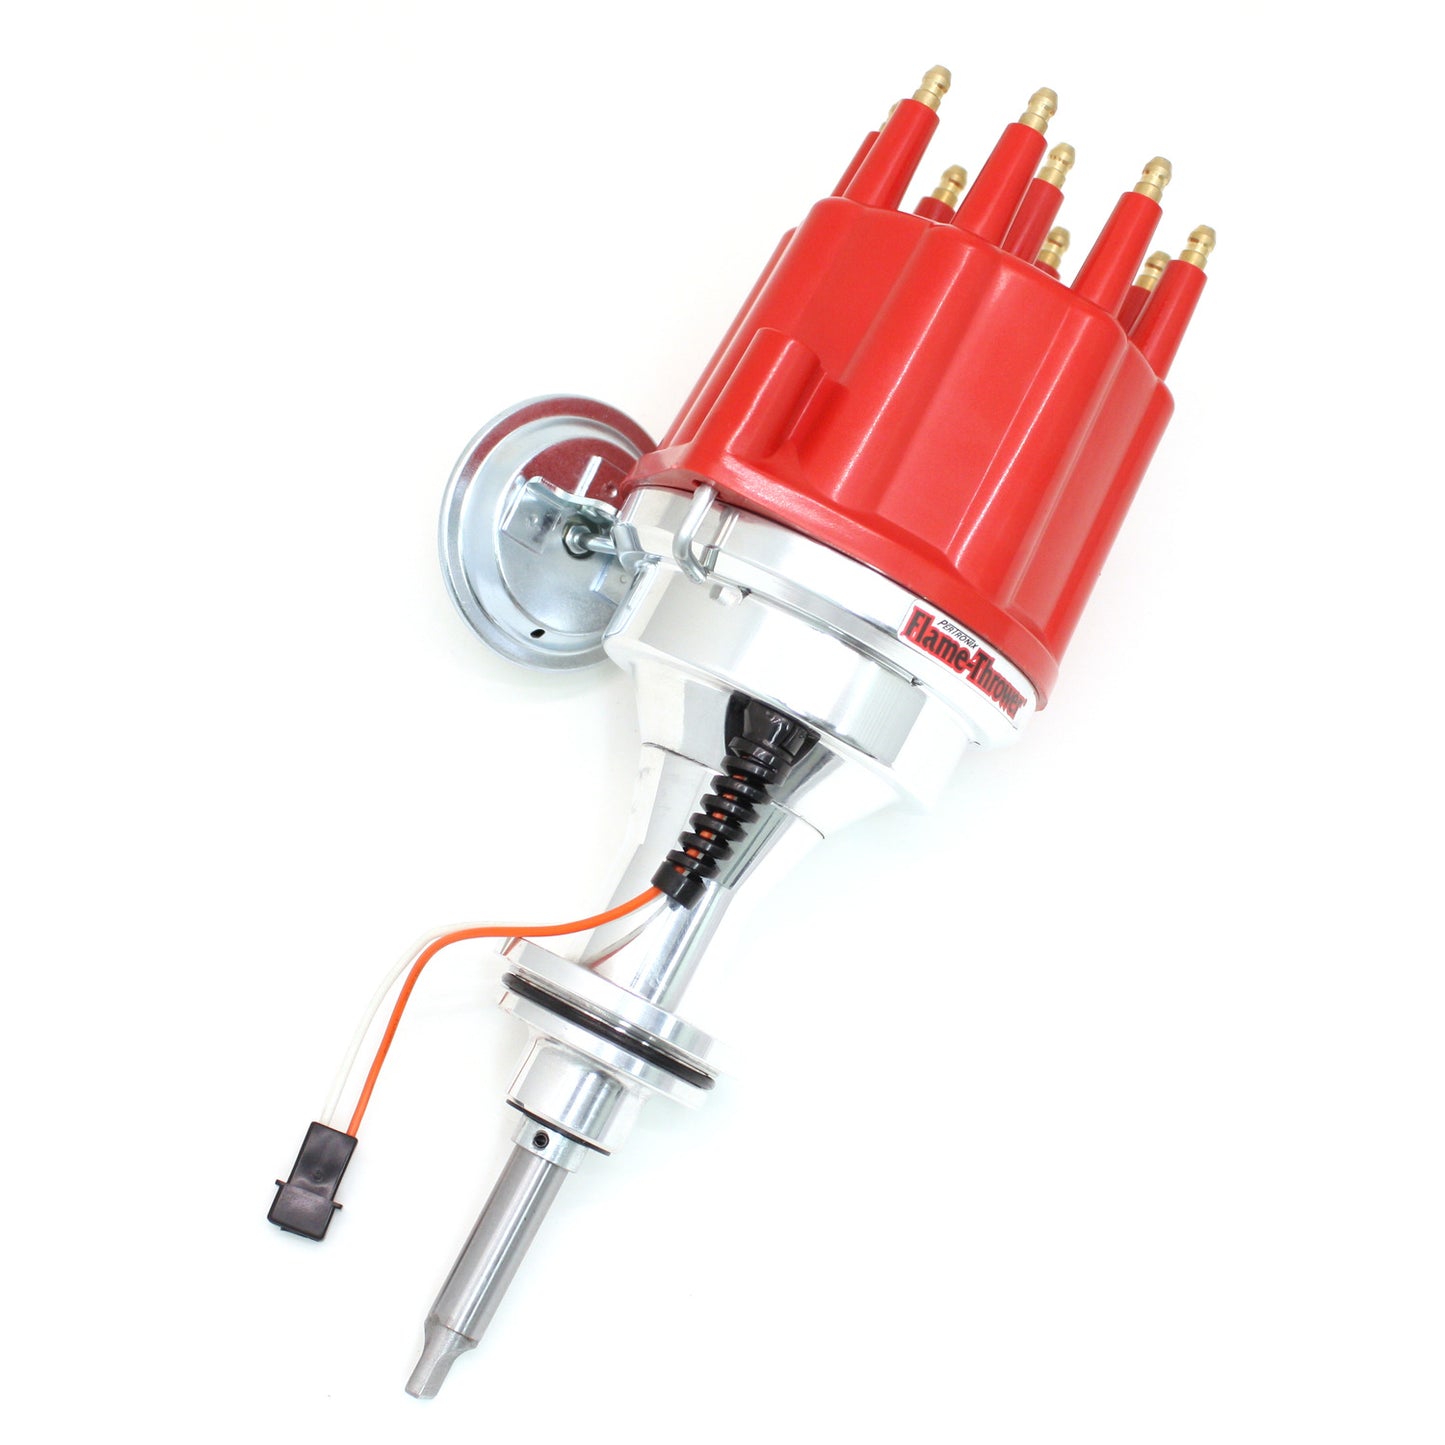 PerTronix D342711 Flame-Thrower Electronic Distributor Billet Magnetic Trigger Chrysler/Dodge/Plymouth 383-400 Red Male Cap Vacuum Advance